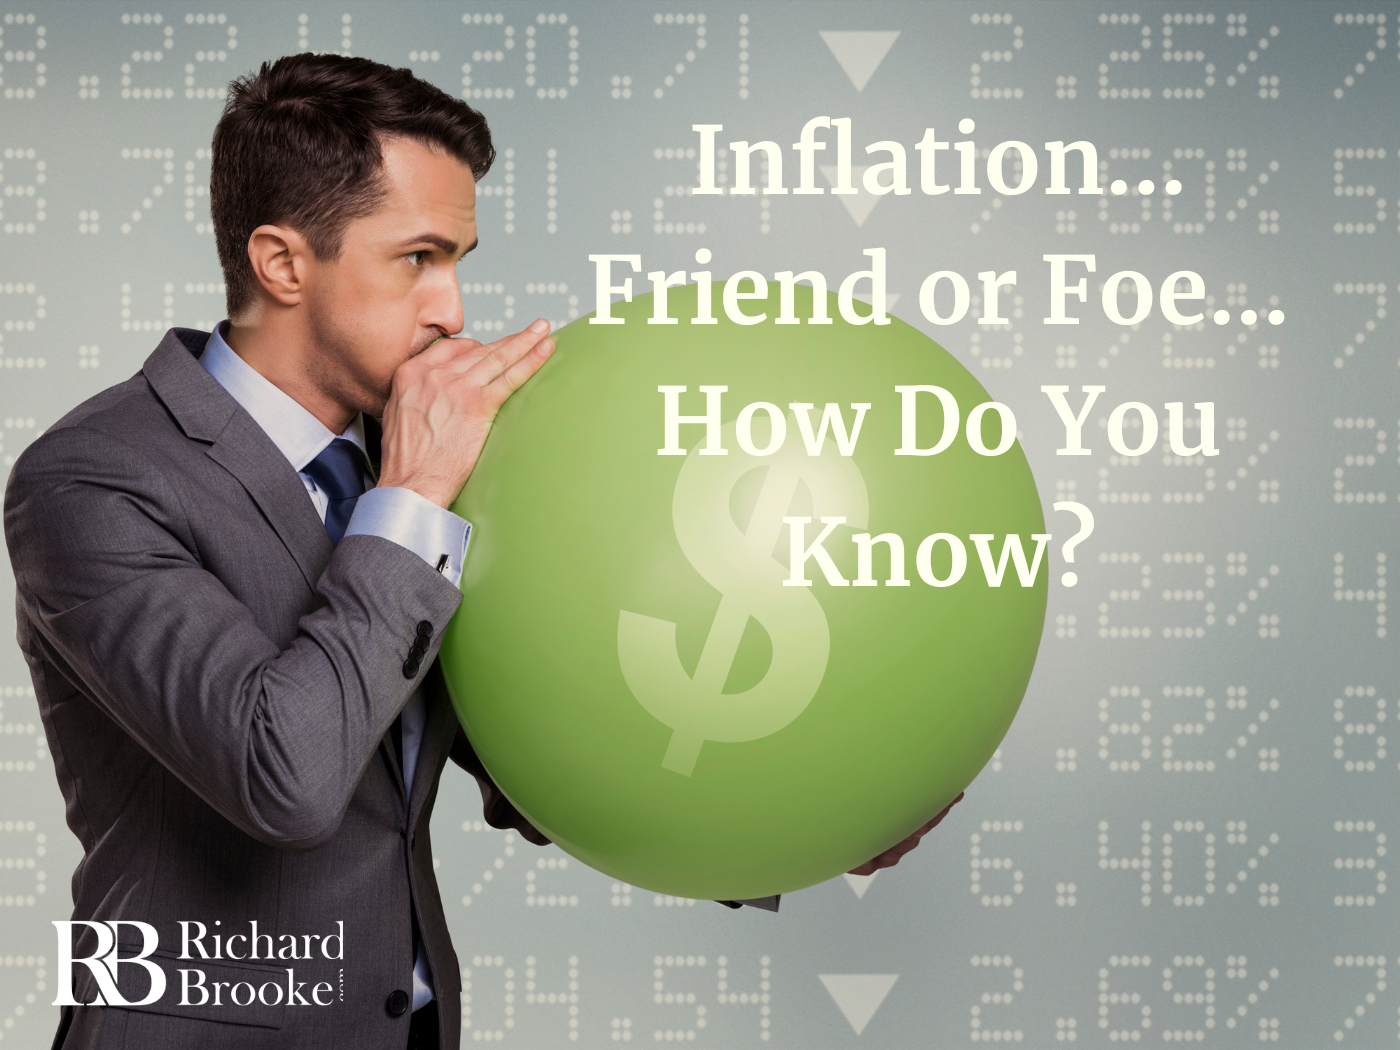 Inflation...Friend or Foe...How do you know?